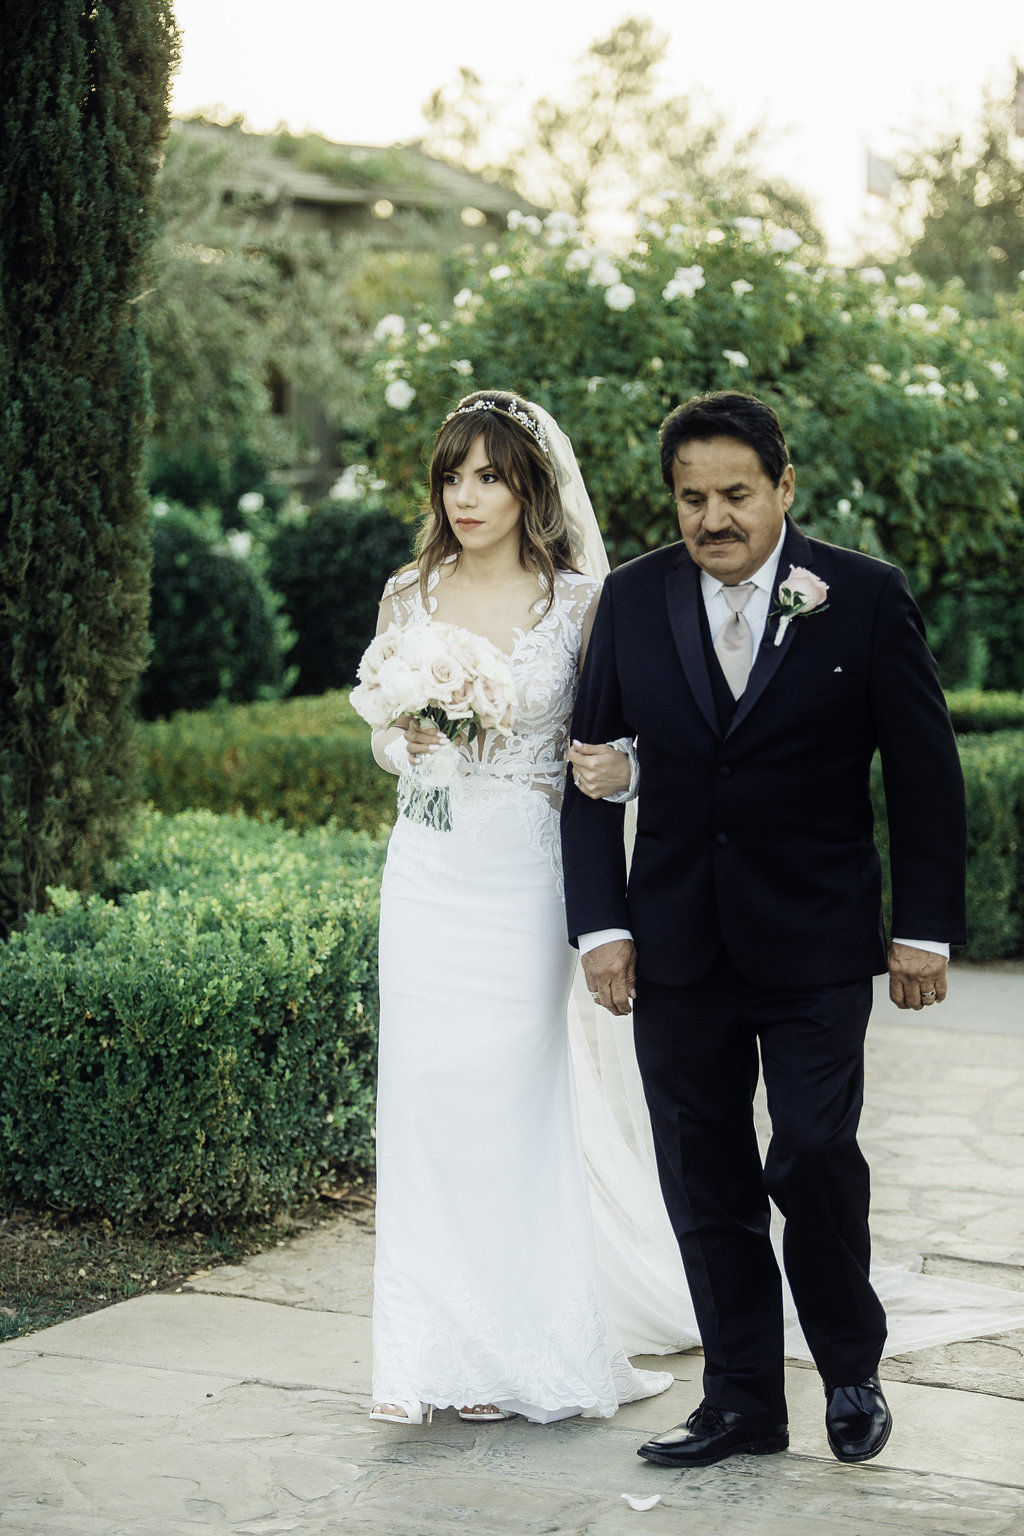 Wedding Photograph Of Father And Bride in White Dress Los Angeles